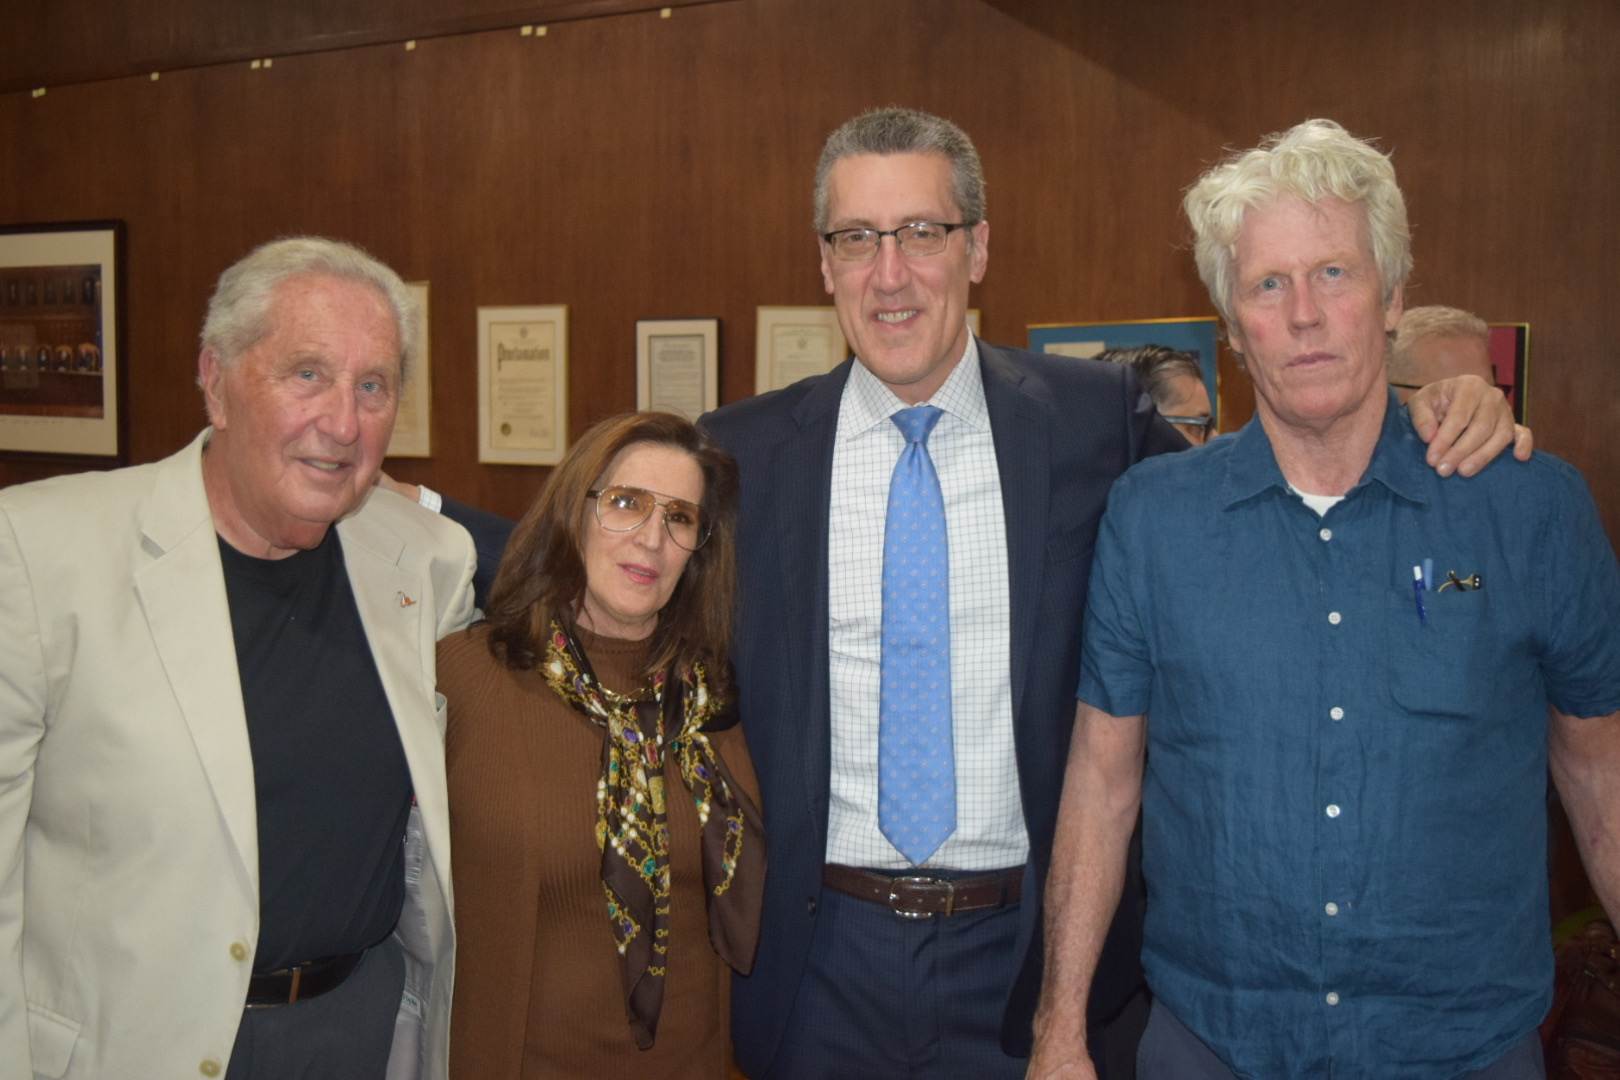 From left: George Farkas, Hon. Anne Swern, Michael Farkas and Samuel Gregory.